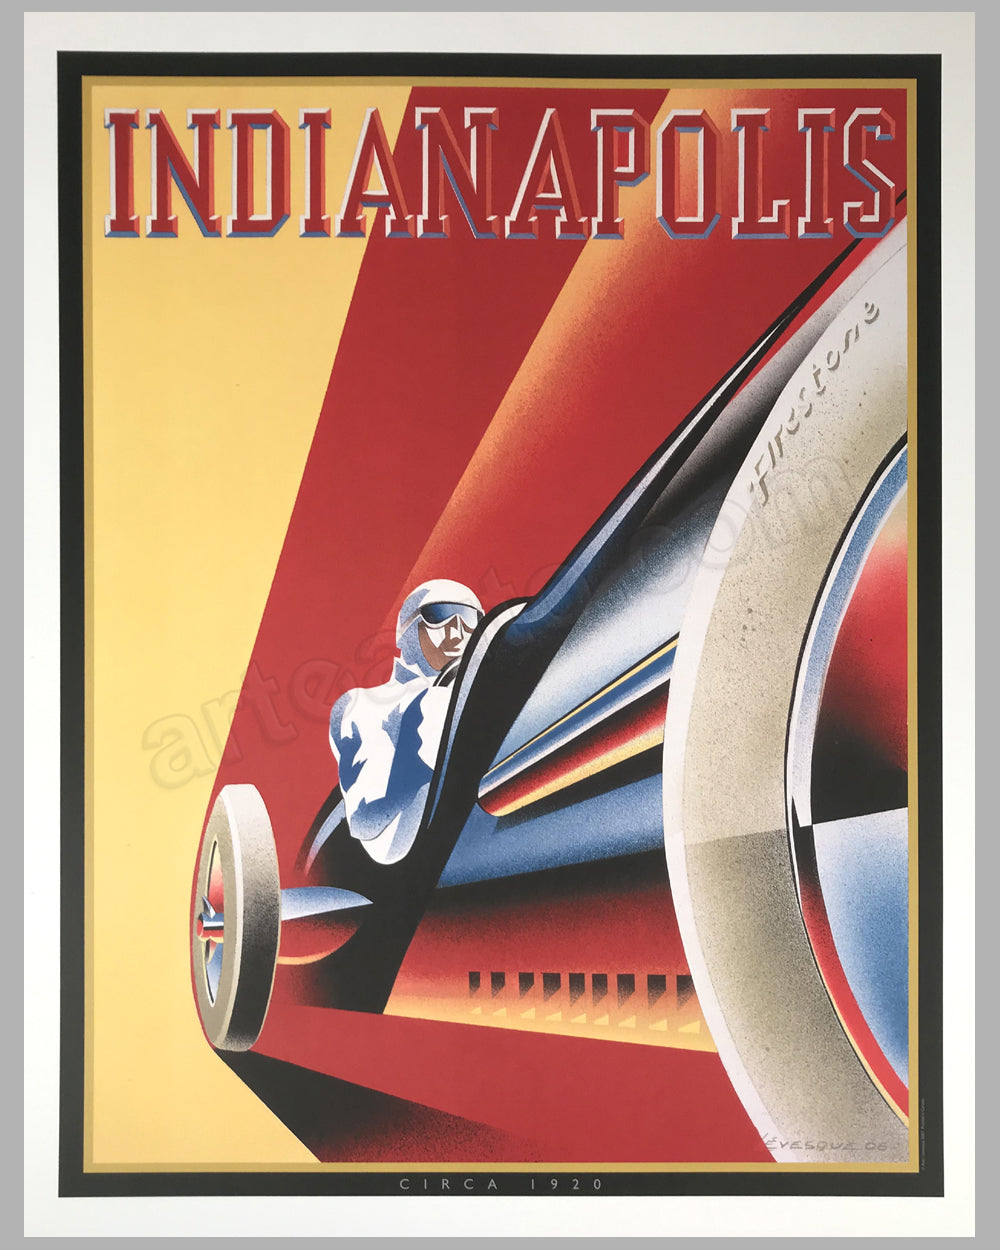 Indianapolis poster by Alain Lévesque